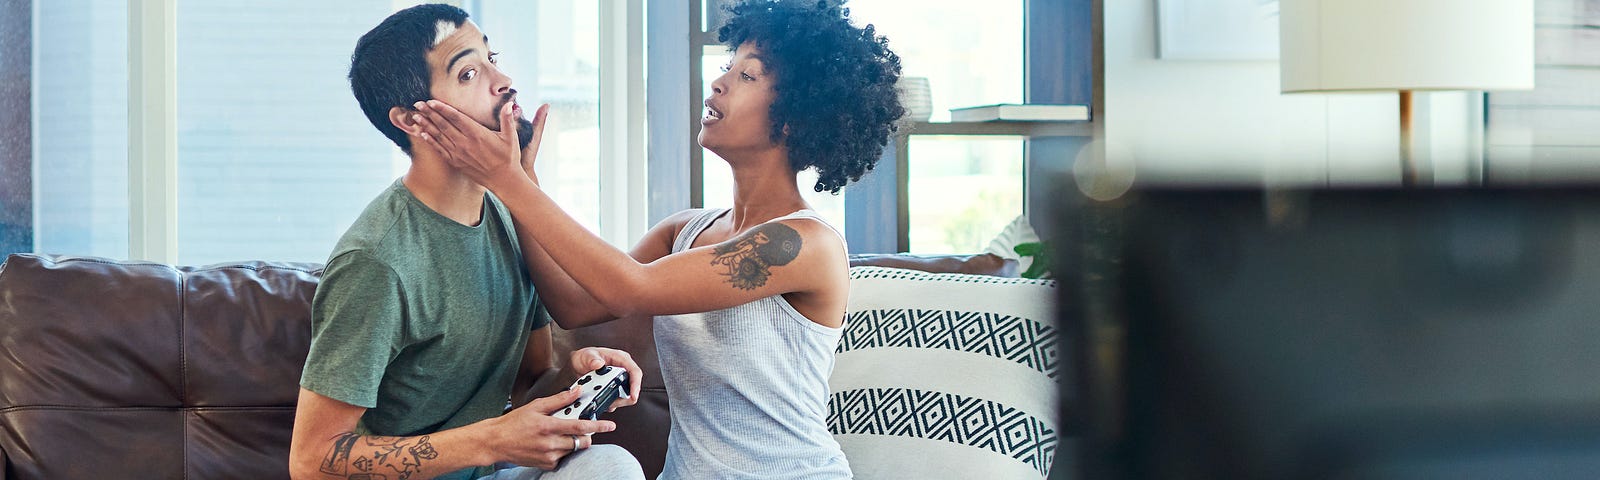 A couple sitting on a couch. One has their hands on the face of the other, who is distracted playing video games.